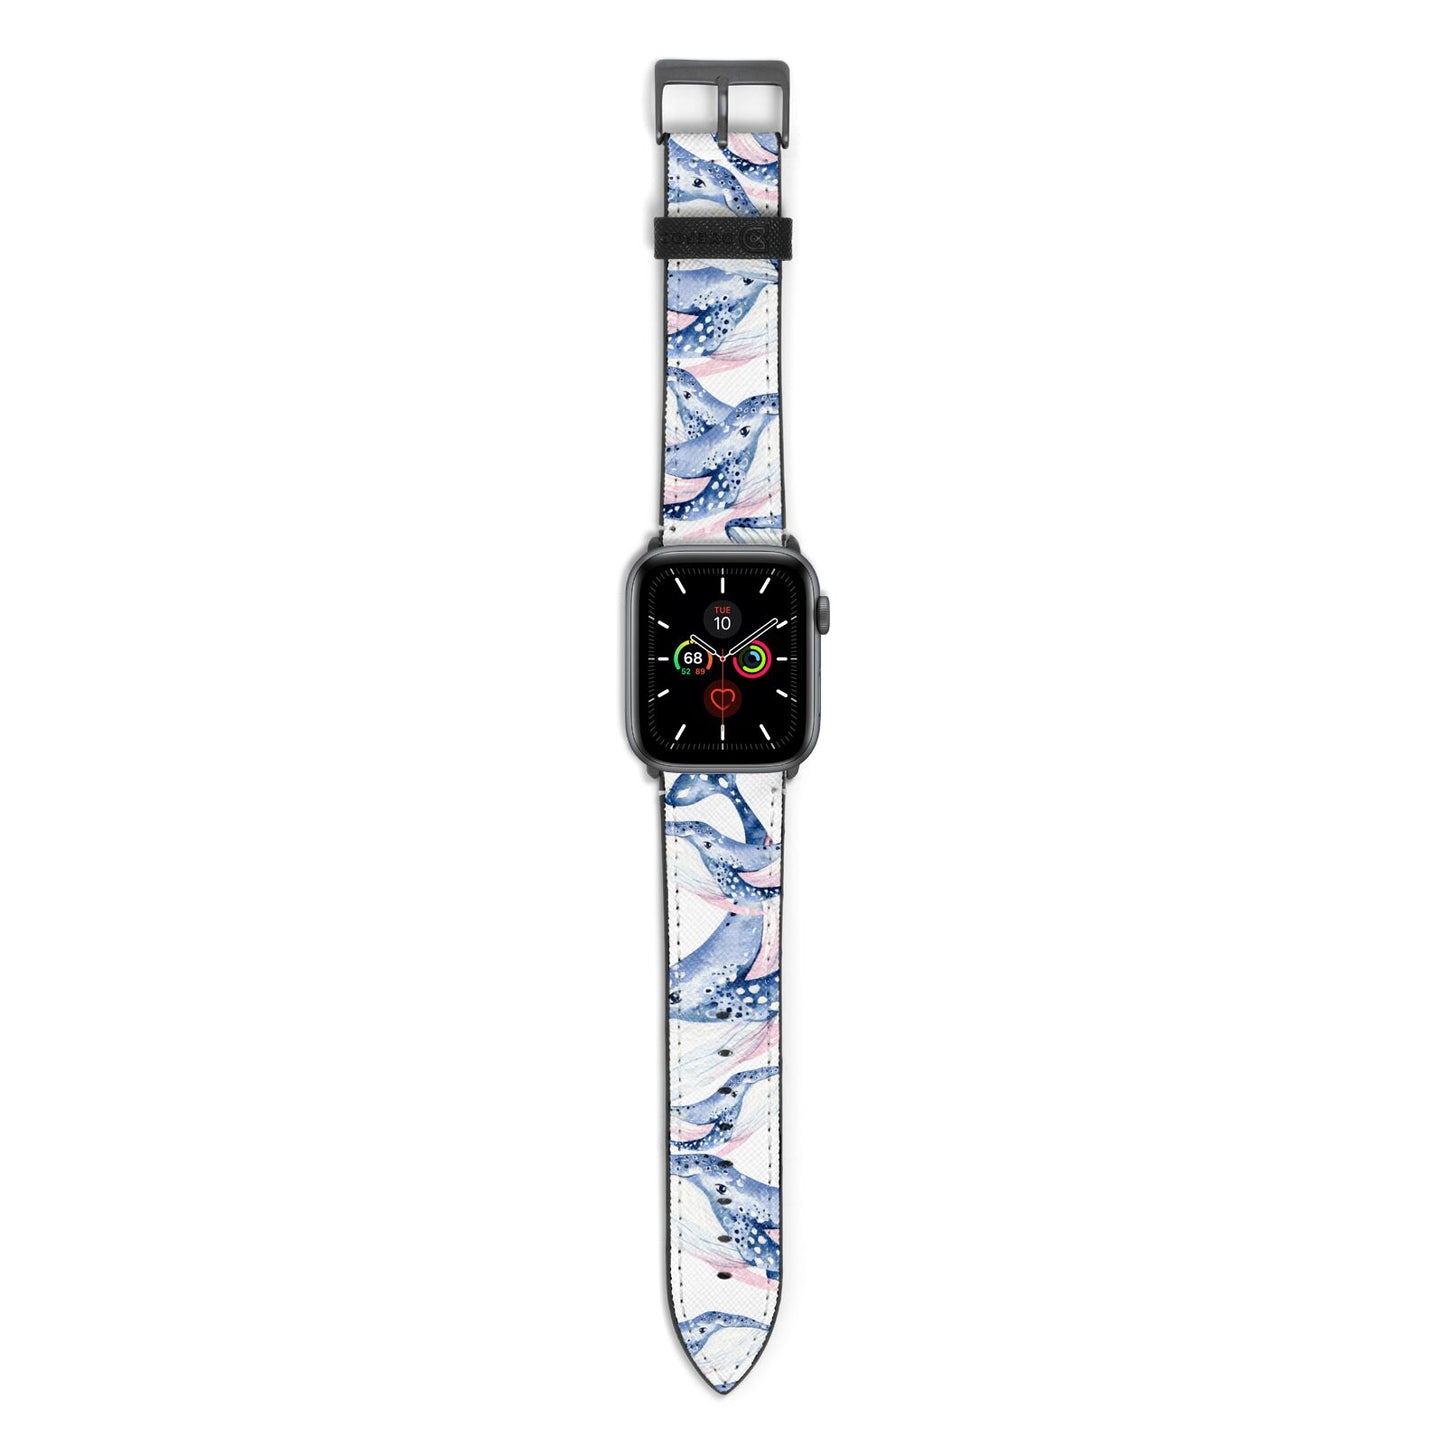 Whale Apple Watch Strap with Space Grey Hardware